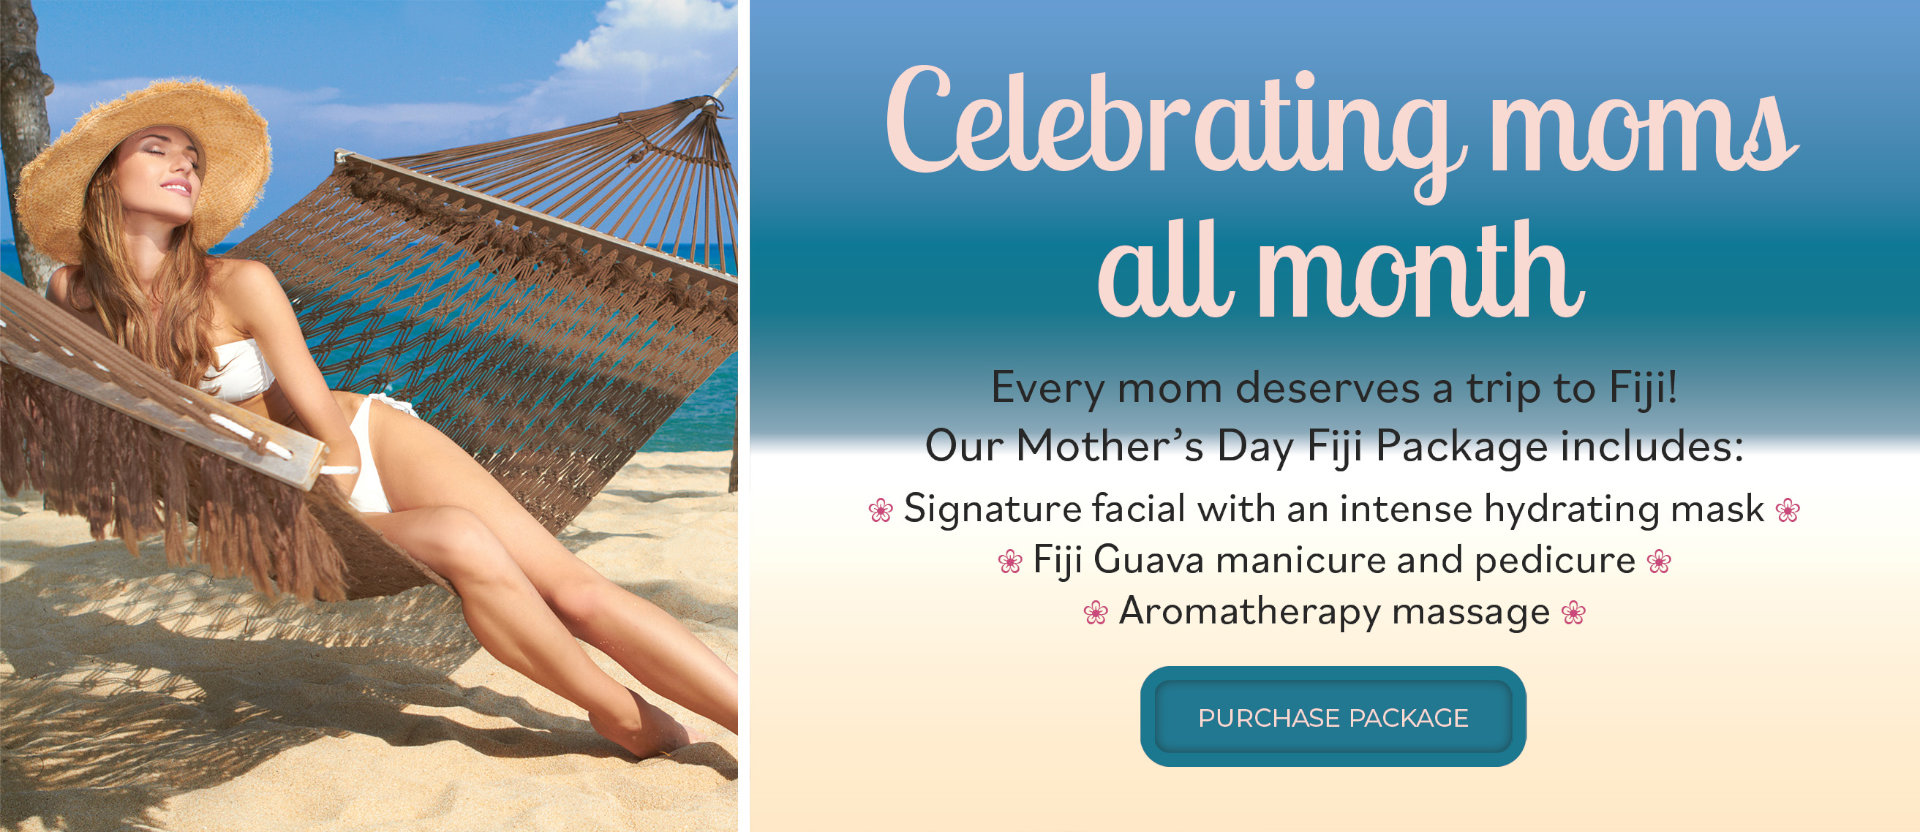 Celebrating moms all month. Every mom deserves a trip to Fiji! Our Mother's Day Fiji Package includes: Signature facial with an intense hydrating mask, Fiji guava manicure and pedicure, aromatherapy massage. Purchase package.